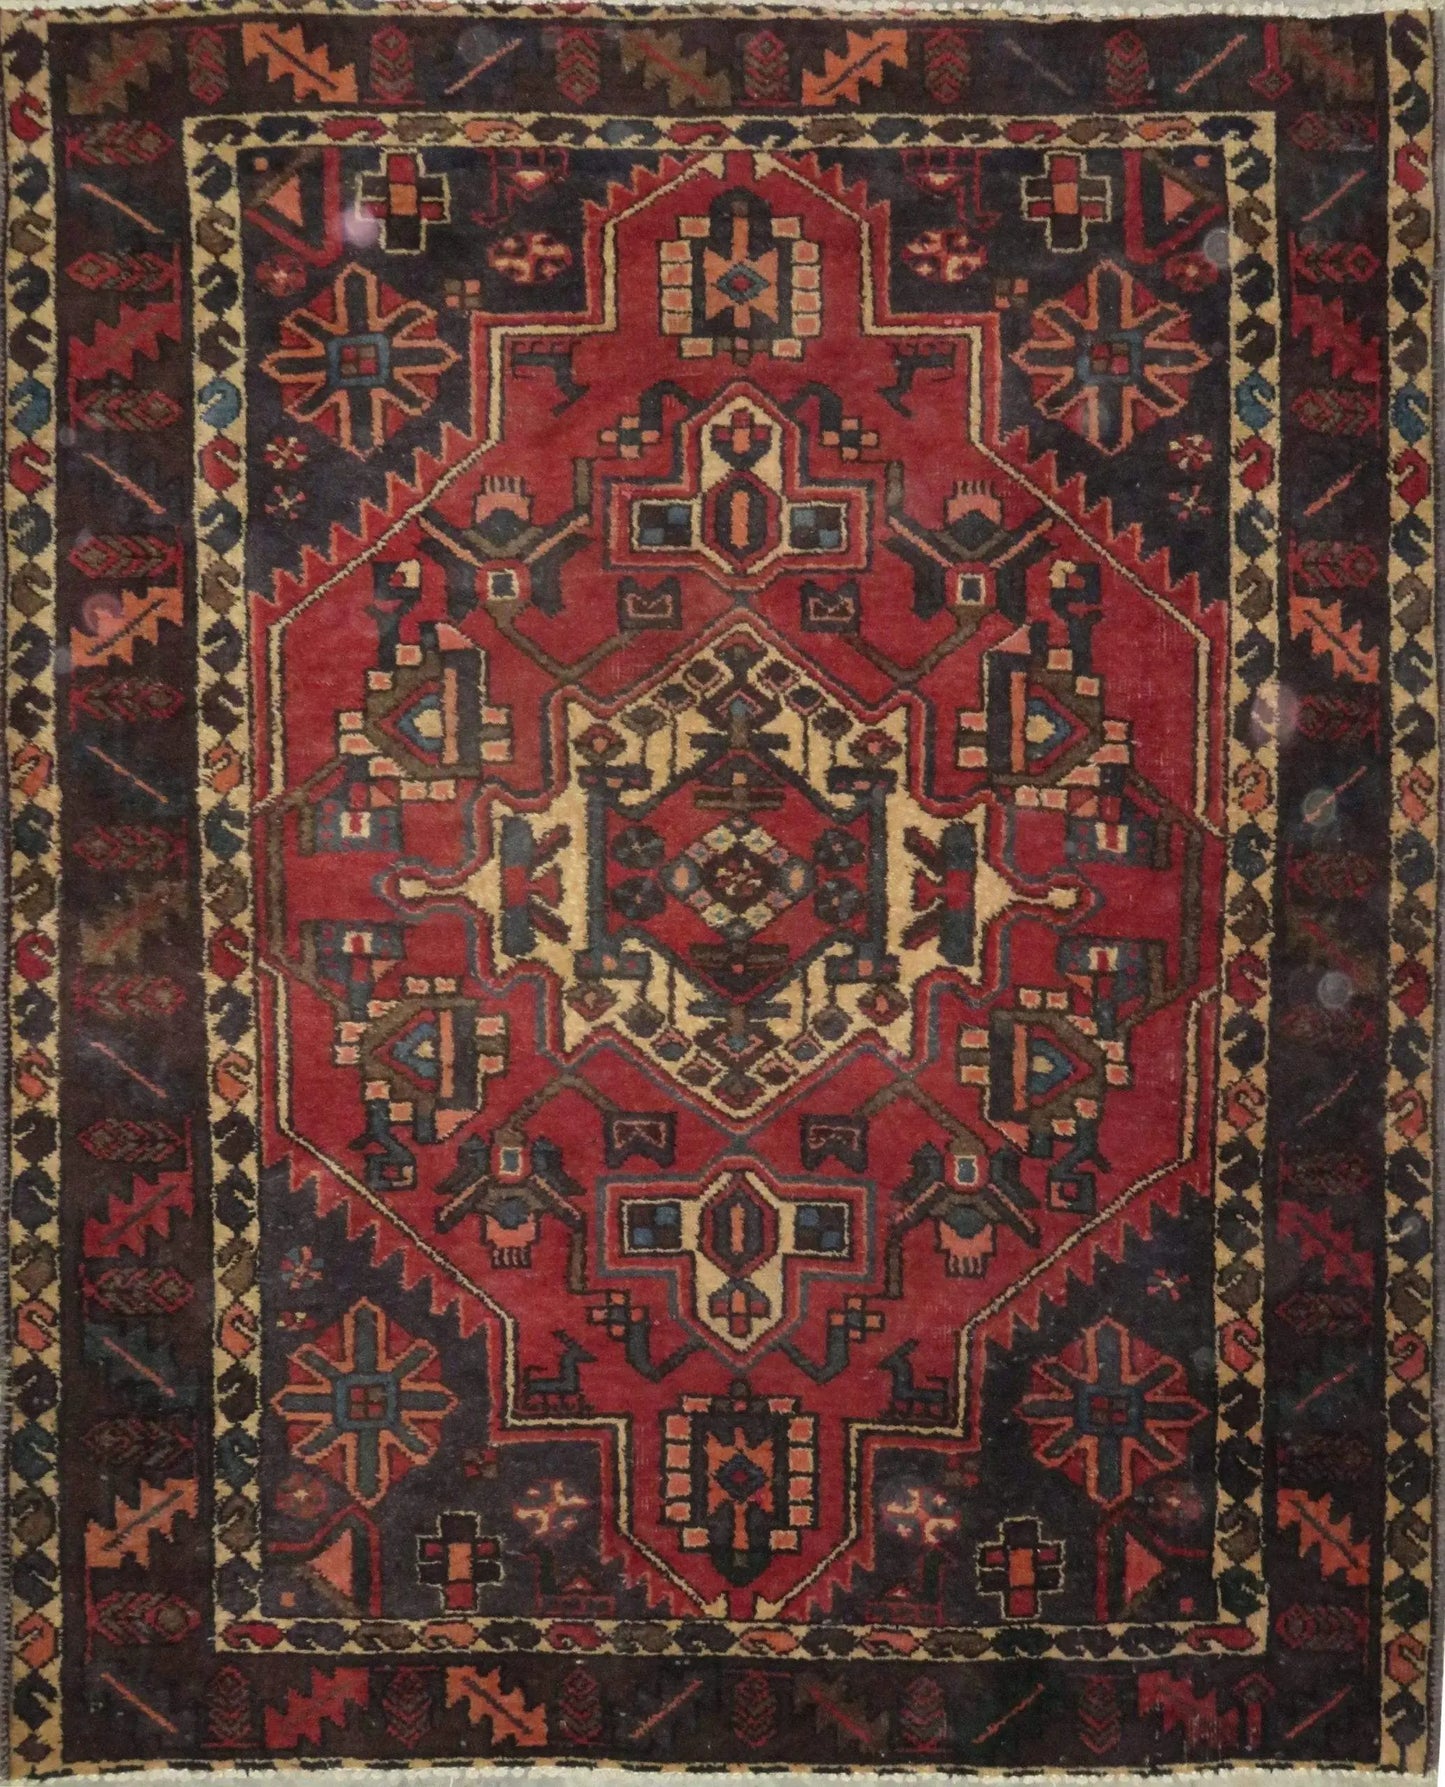 Hand-Knotted Persian Wool Rug _ Luxurious Vintage Design, 6'1" x 5'2", Artisan Crafted